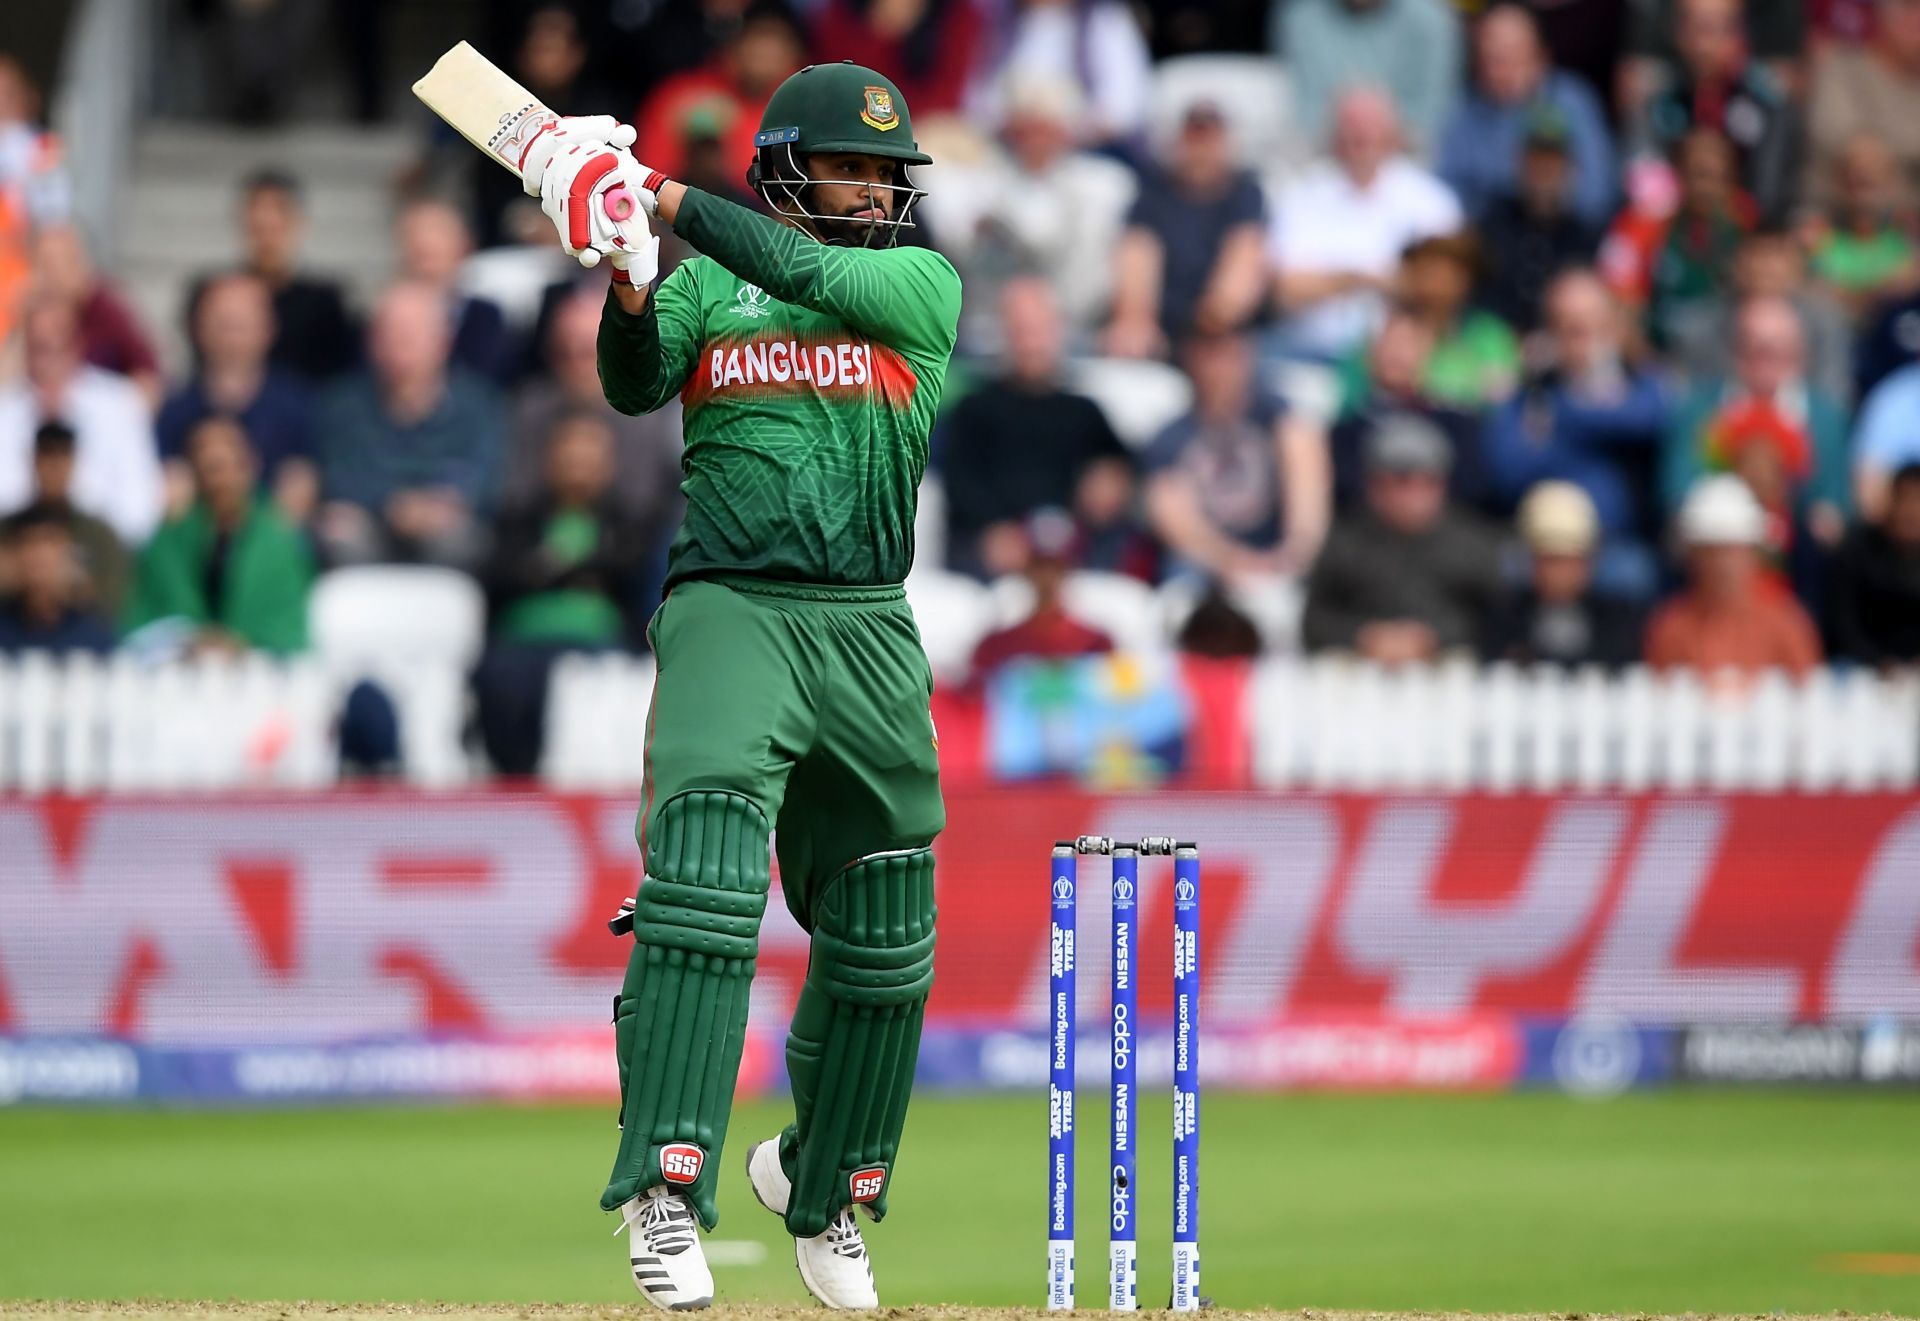 Tamim Iqbal was the most successful Asian batter in one-day internationals this year.